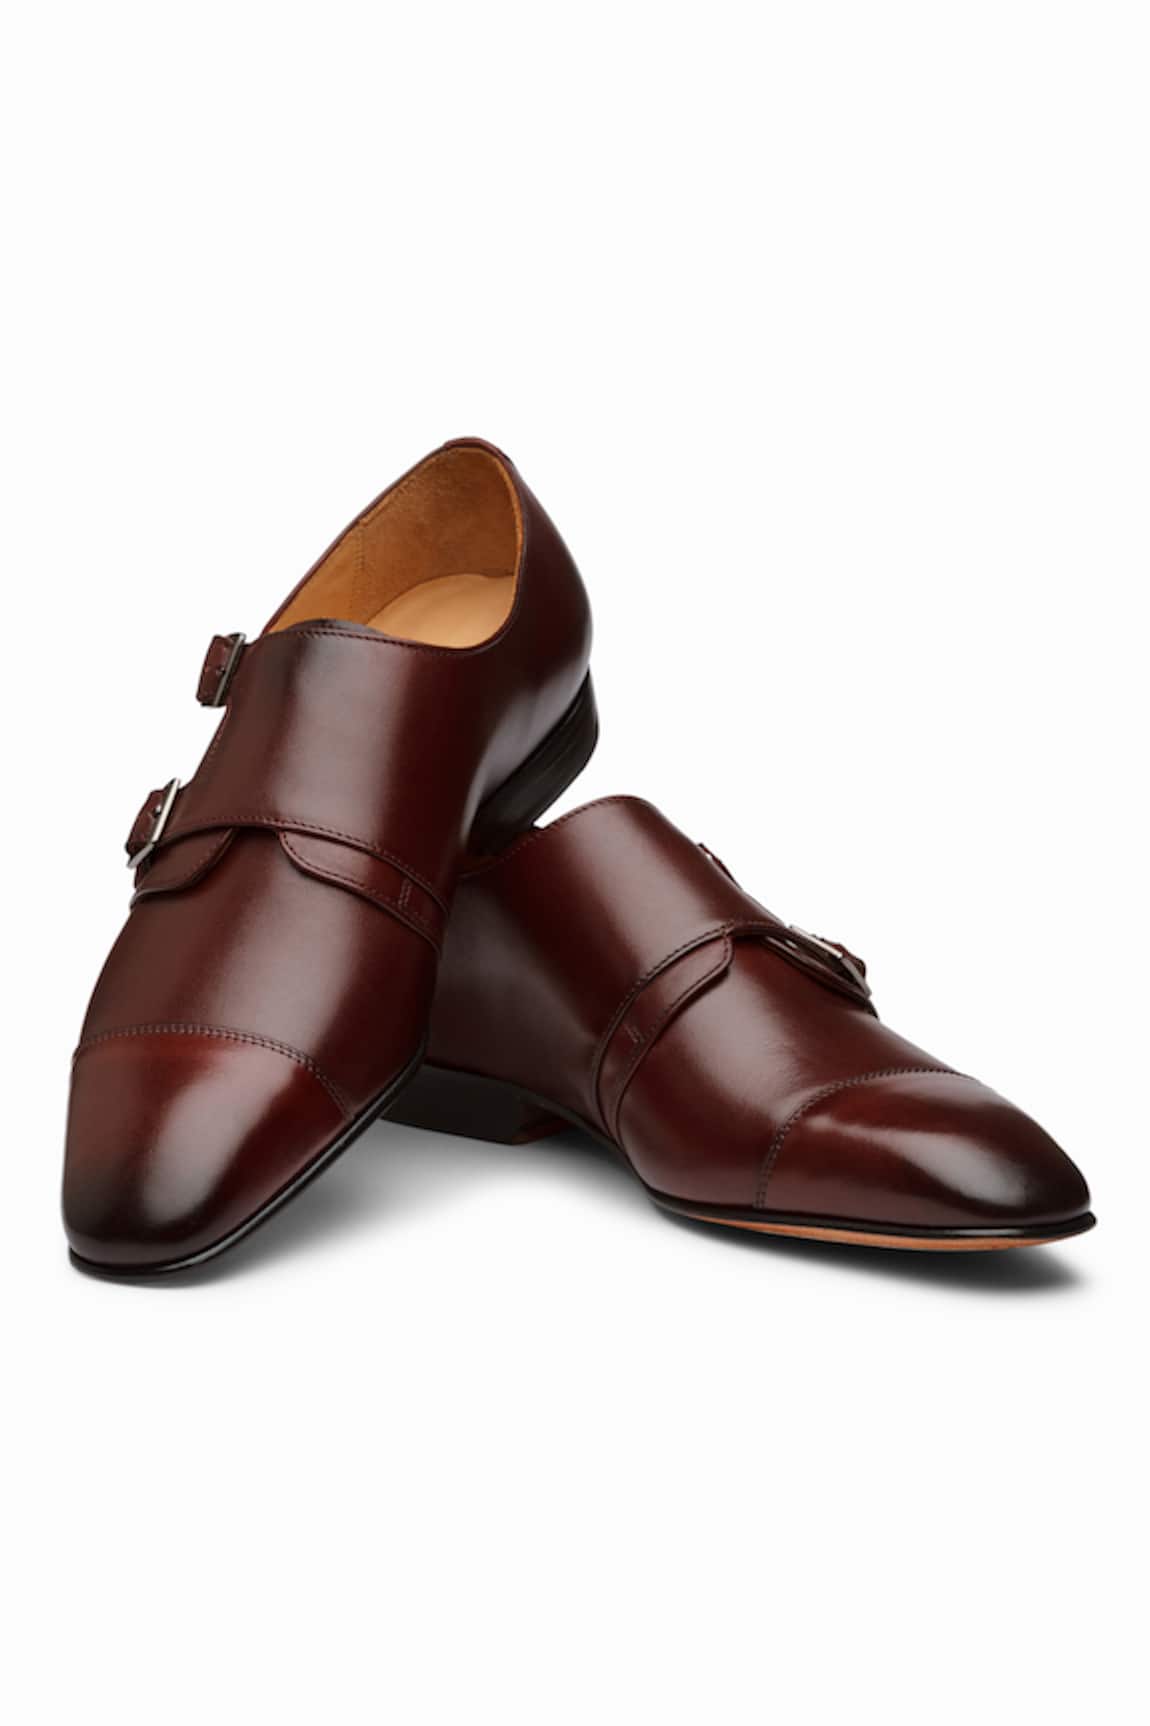 3DM LIFESTYLE Off-Centred Double Monk Strap Shoes